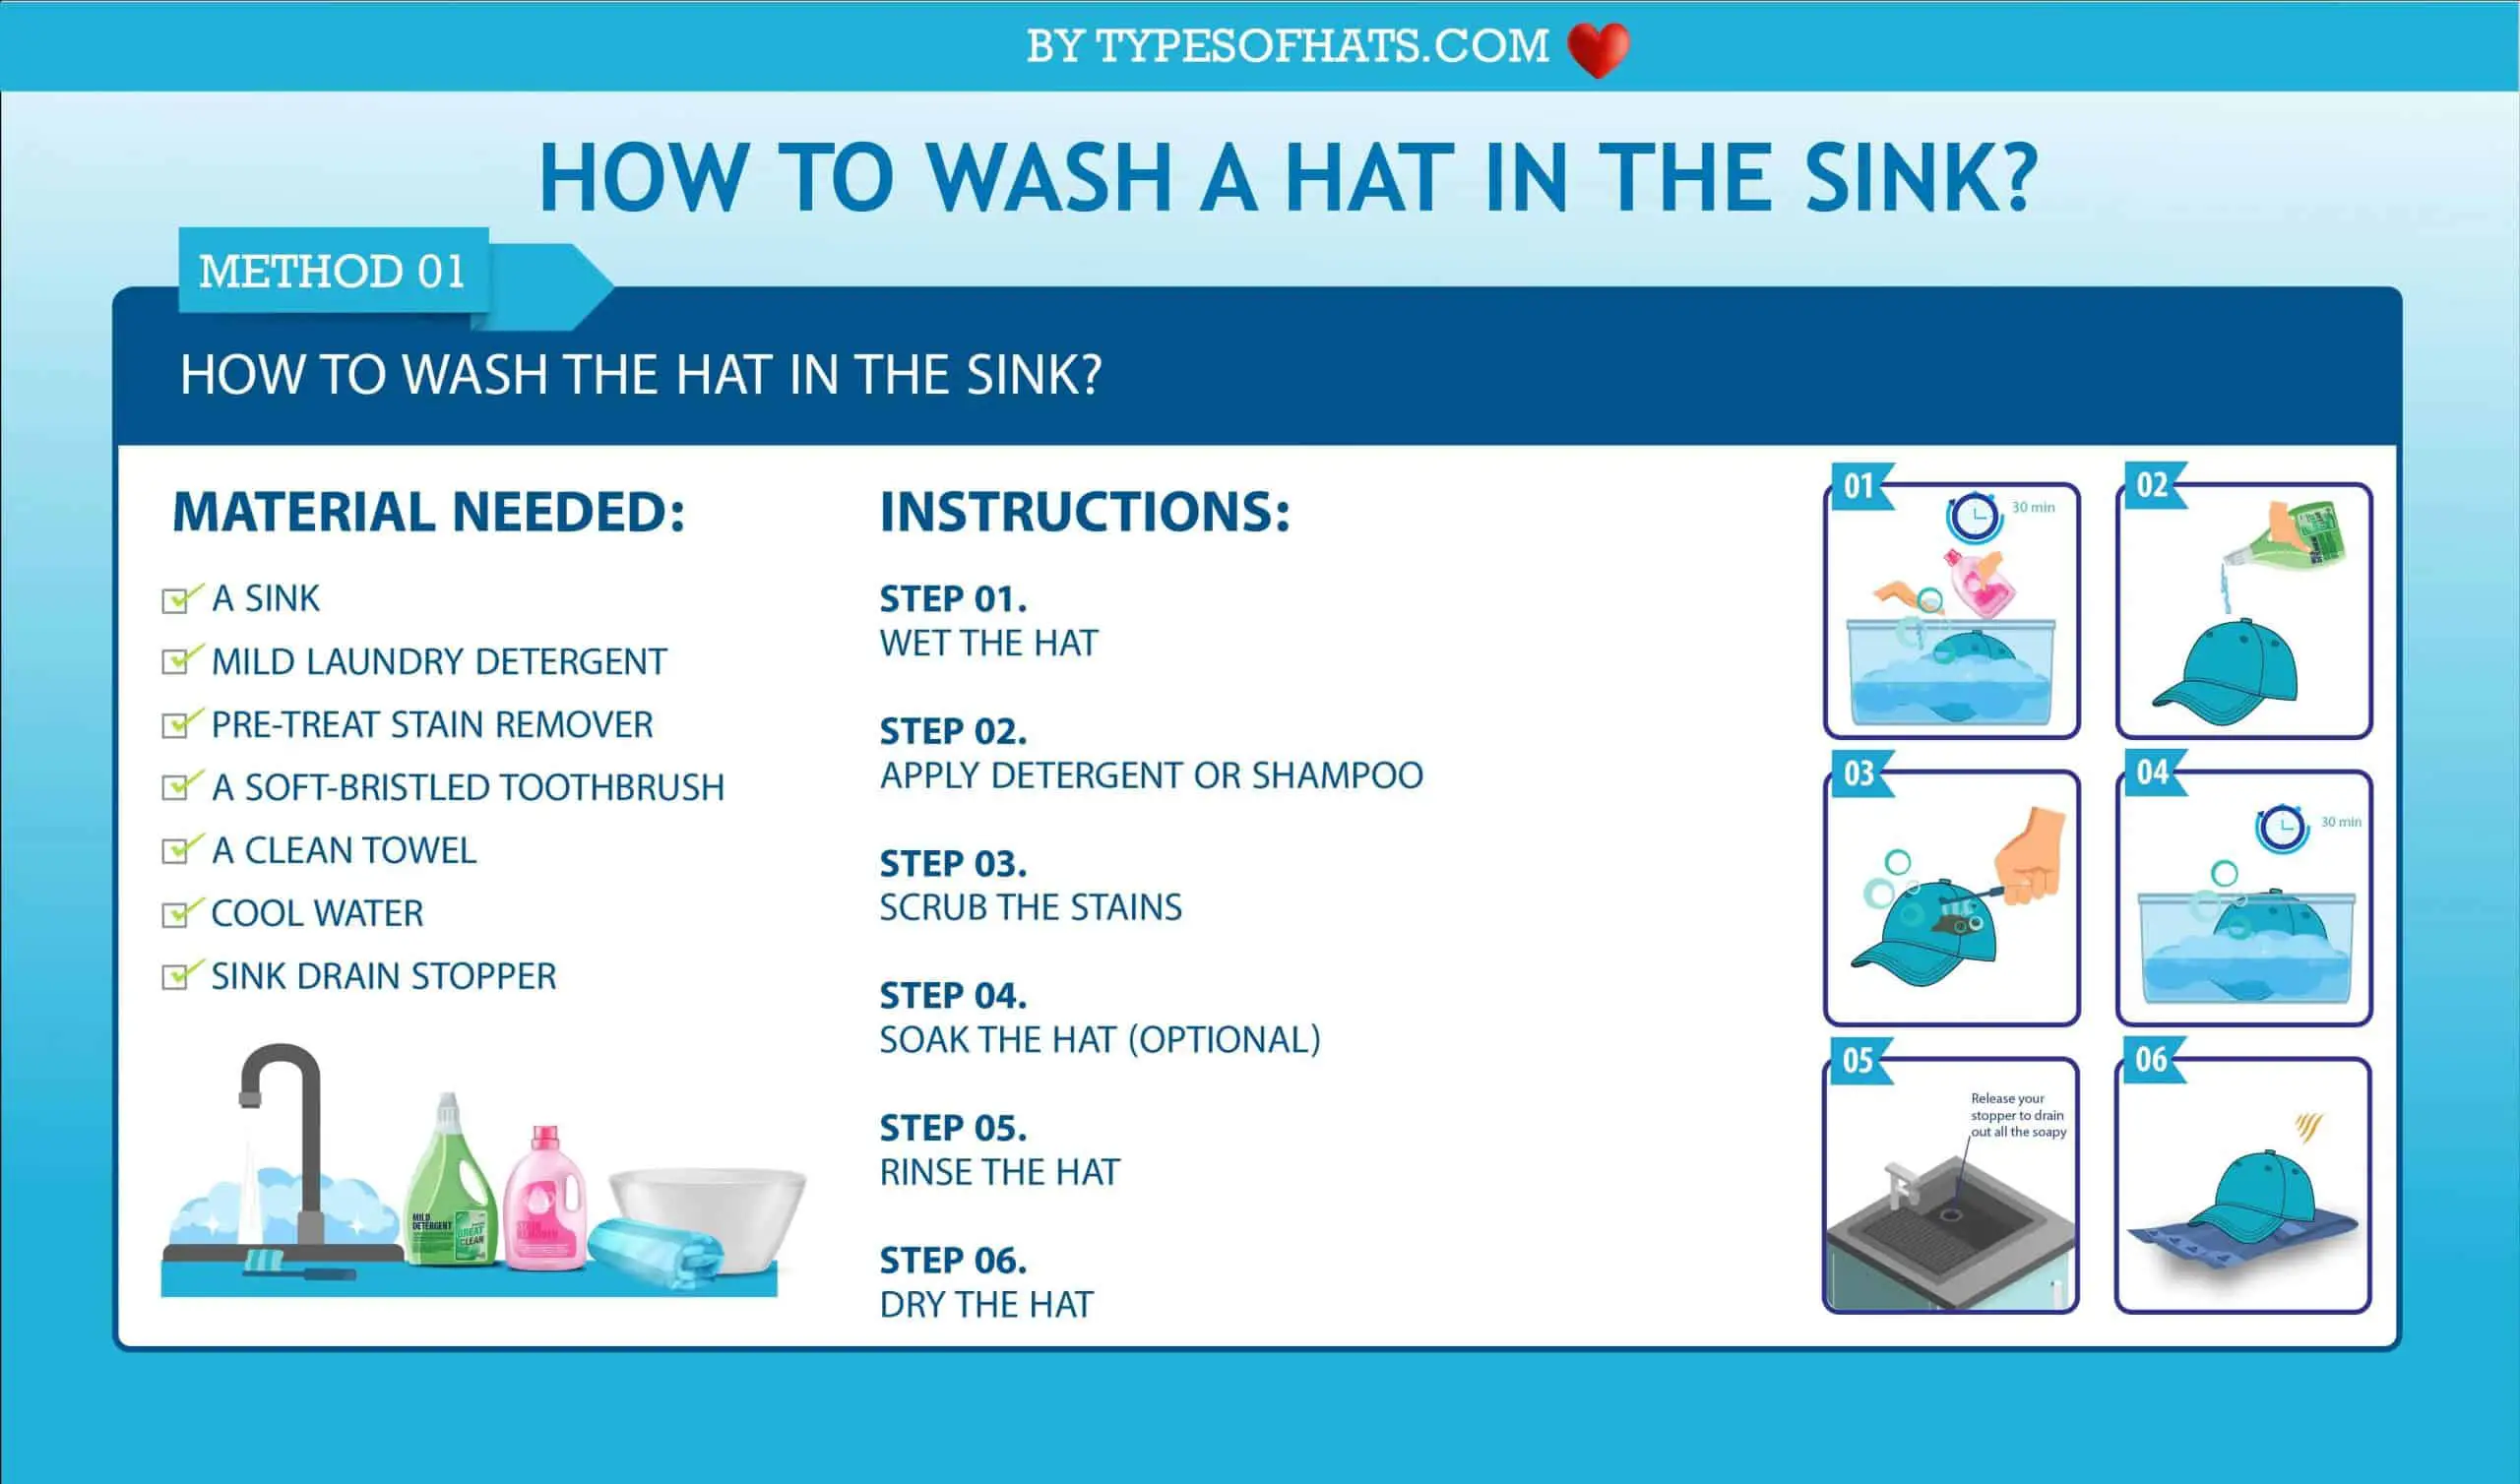 How to Wash a Hat in the Sink (All Thing You Should Know)